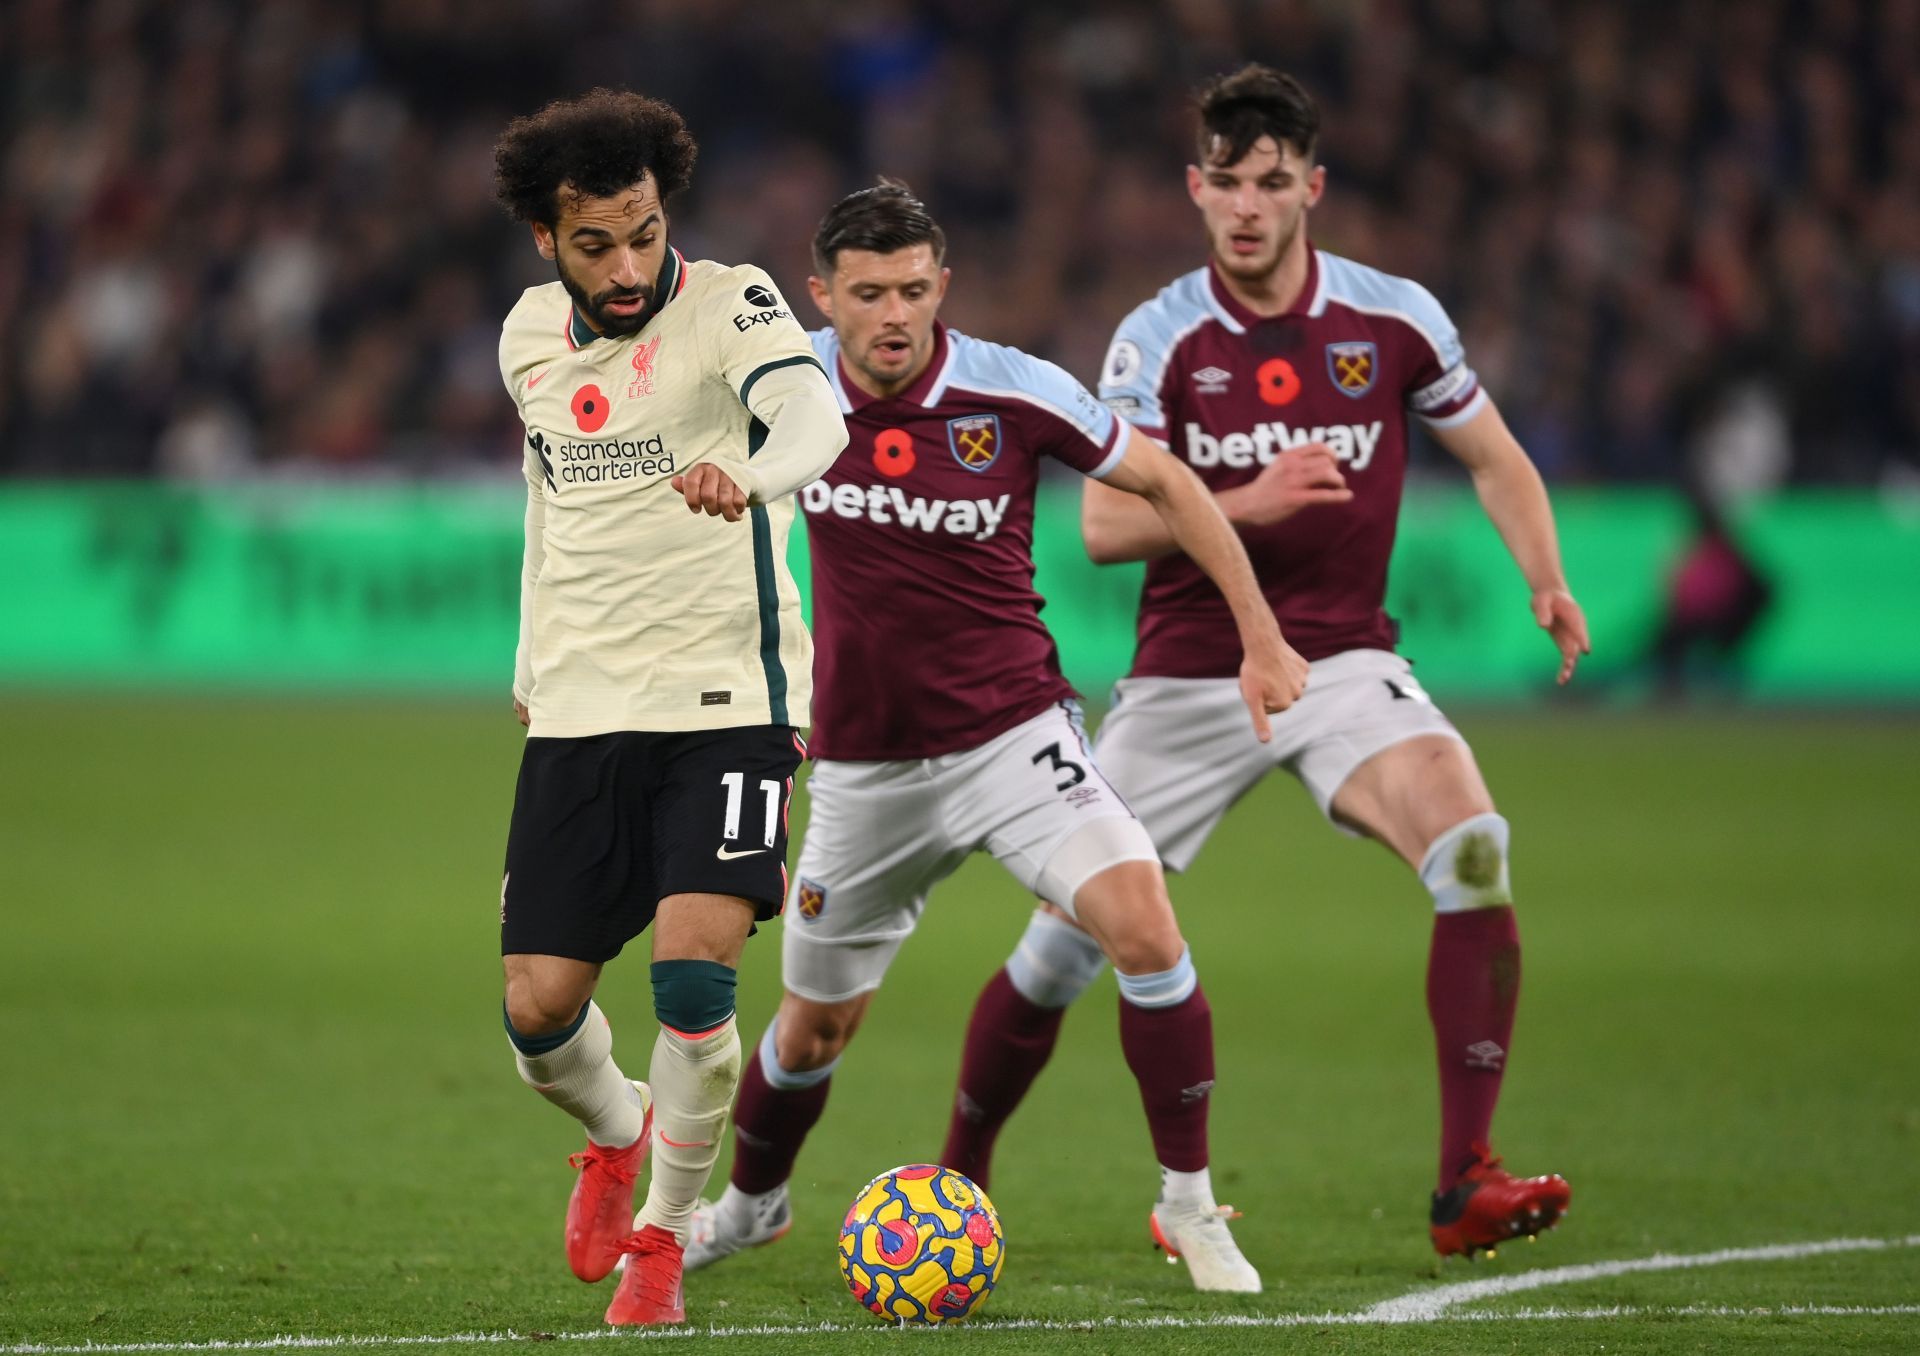 West Ham United take on Liverpool this weekend